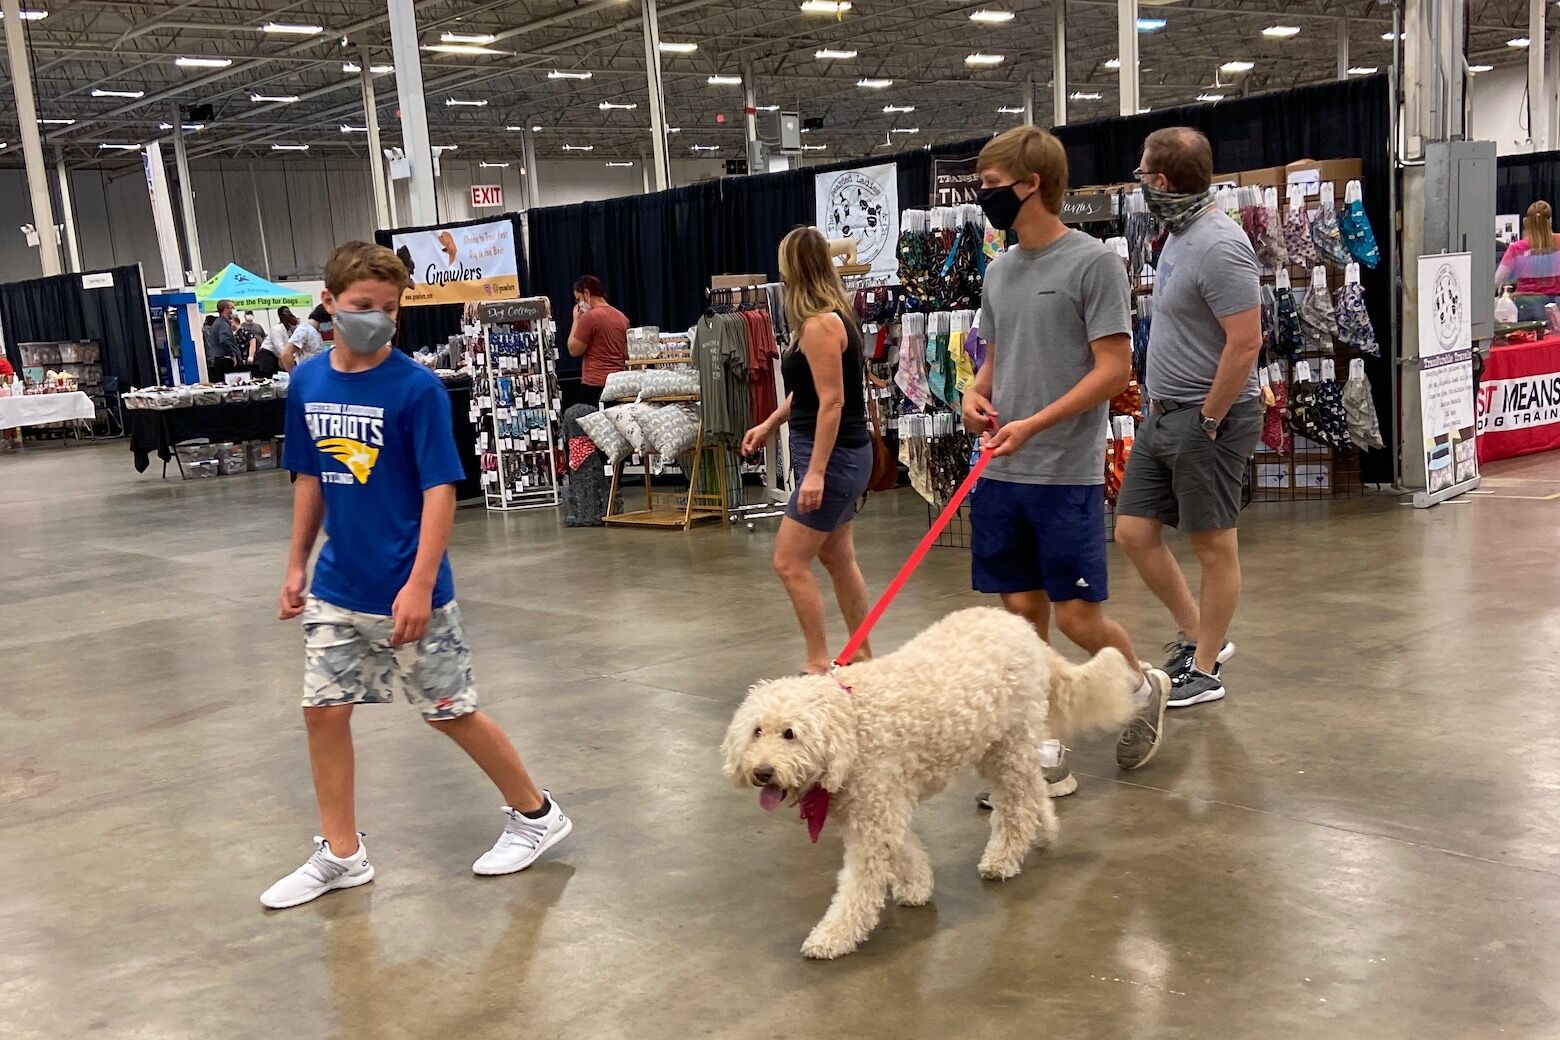 Super Pet Expo offers its first inperson event in Virginia since pandemic began